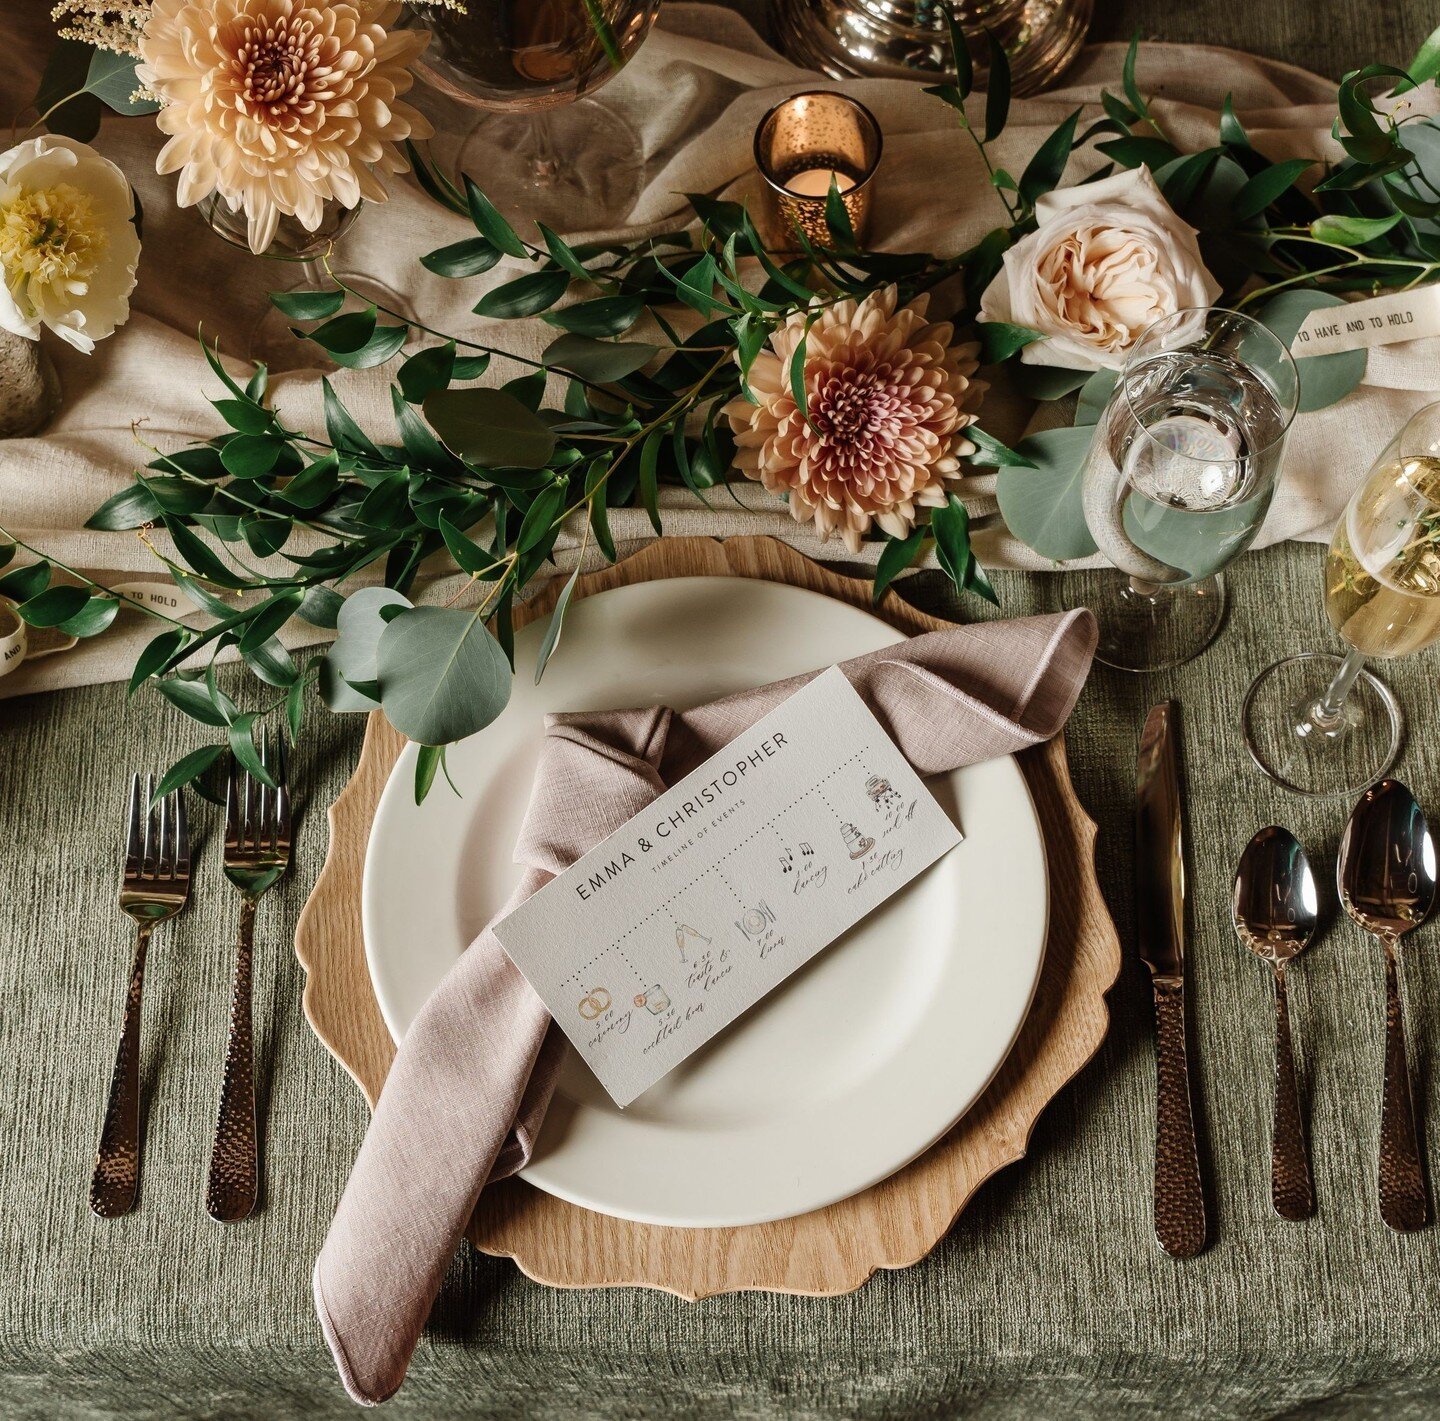 Bringing the beauty of spring to your screens with this dreamy wedding tablescape our wedding team created with @specialoccasionscollection and @petalswithstyle and perfectly paired invitations by @letters.to.rose. 🌿 Allow our team of wedding coordi